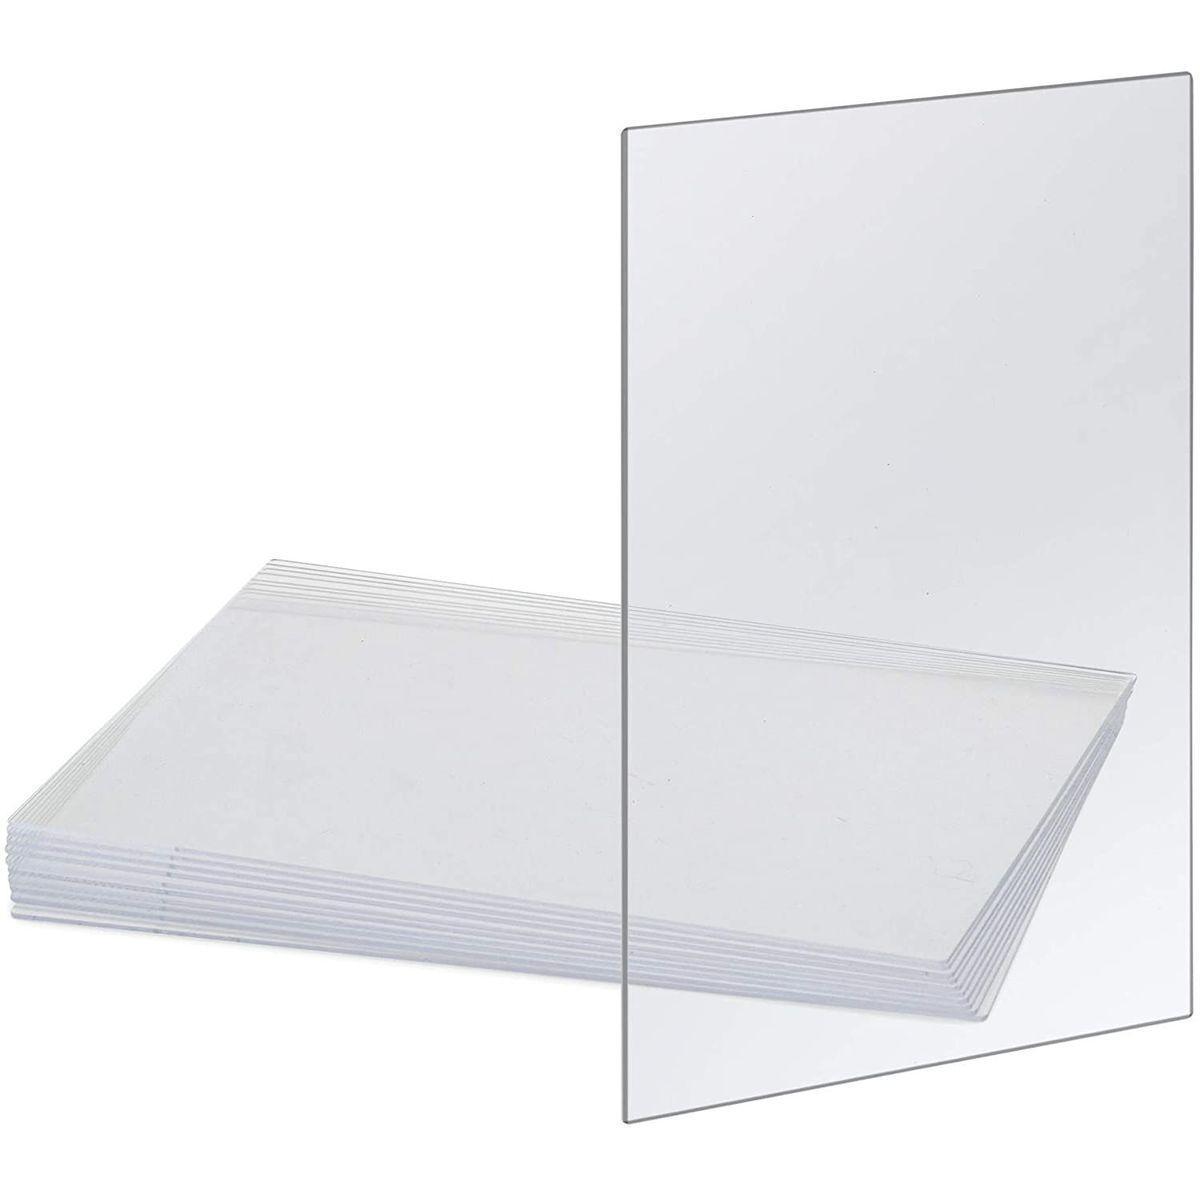  4x6 Acrylic Sheet, Replacement Glass Picture Frame 10